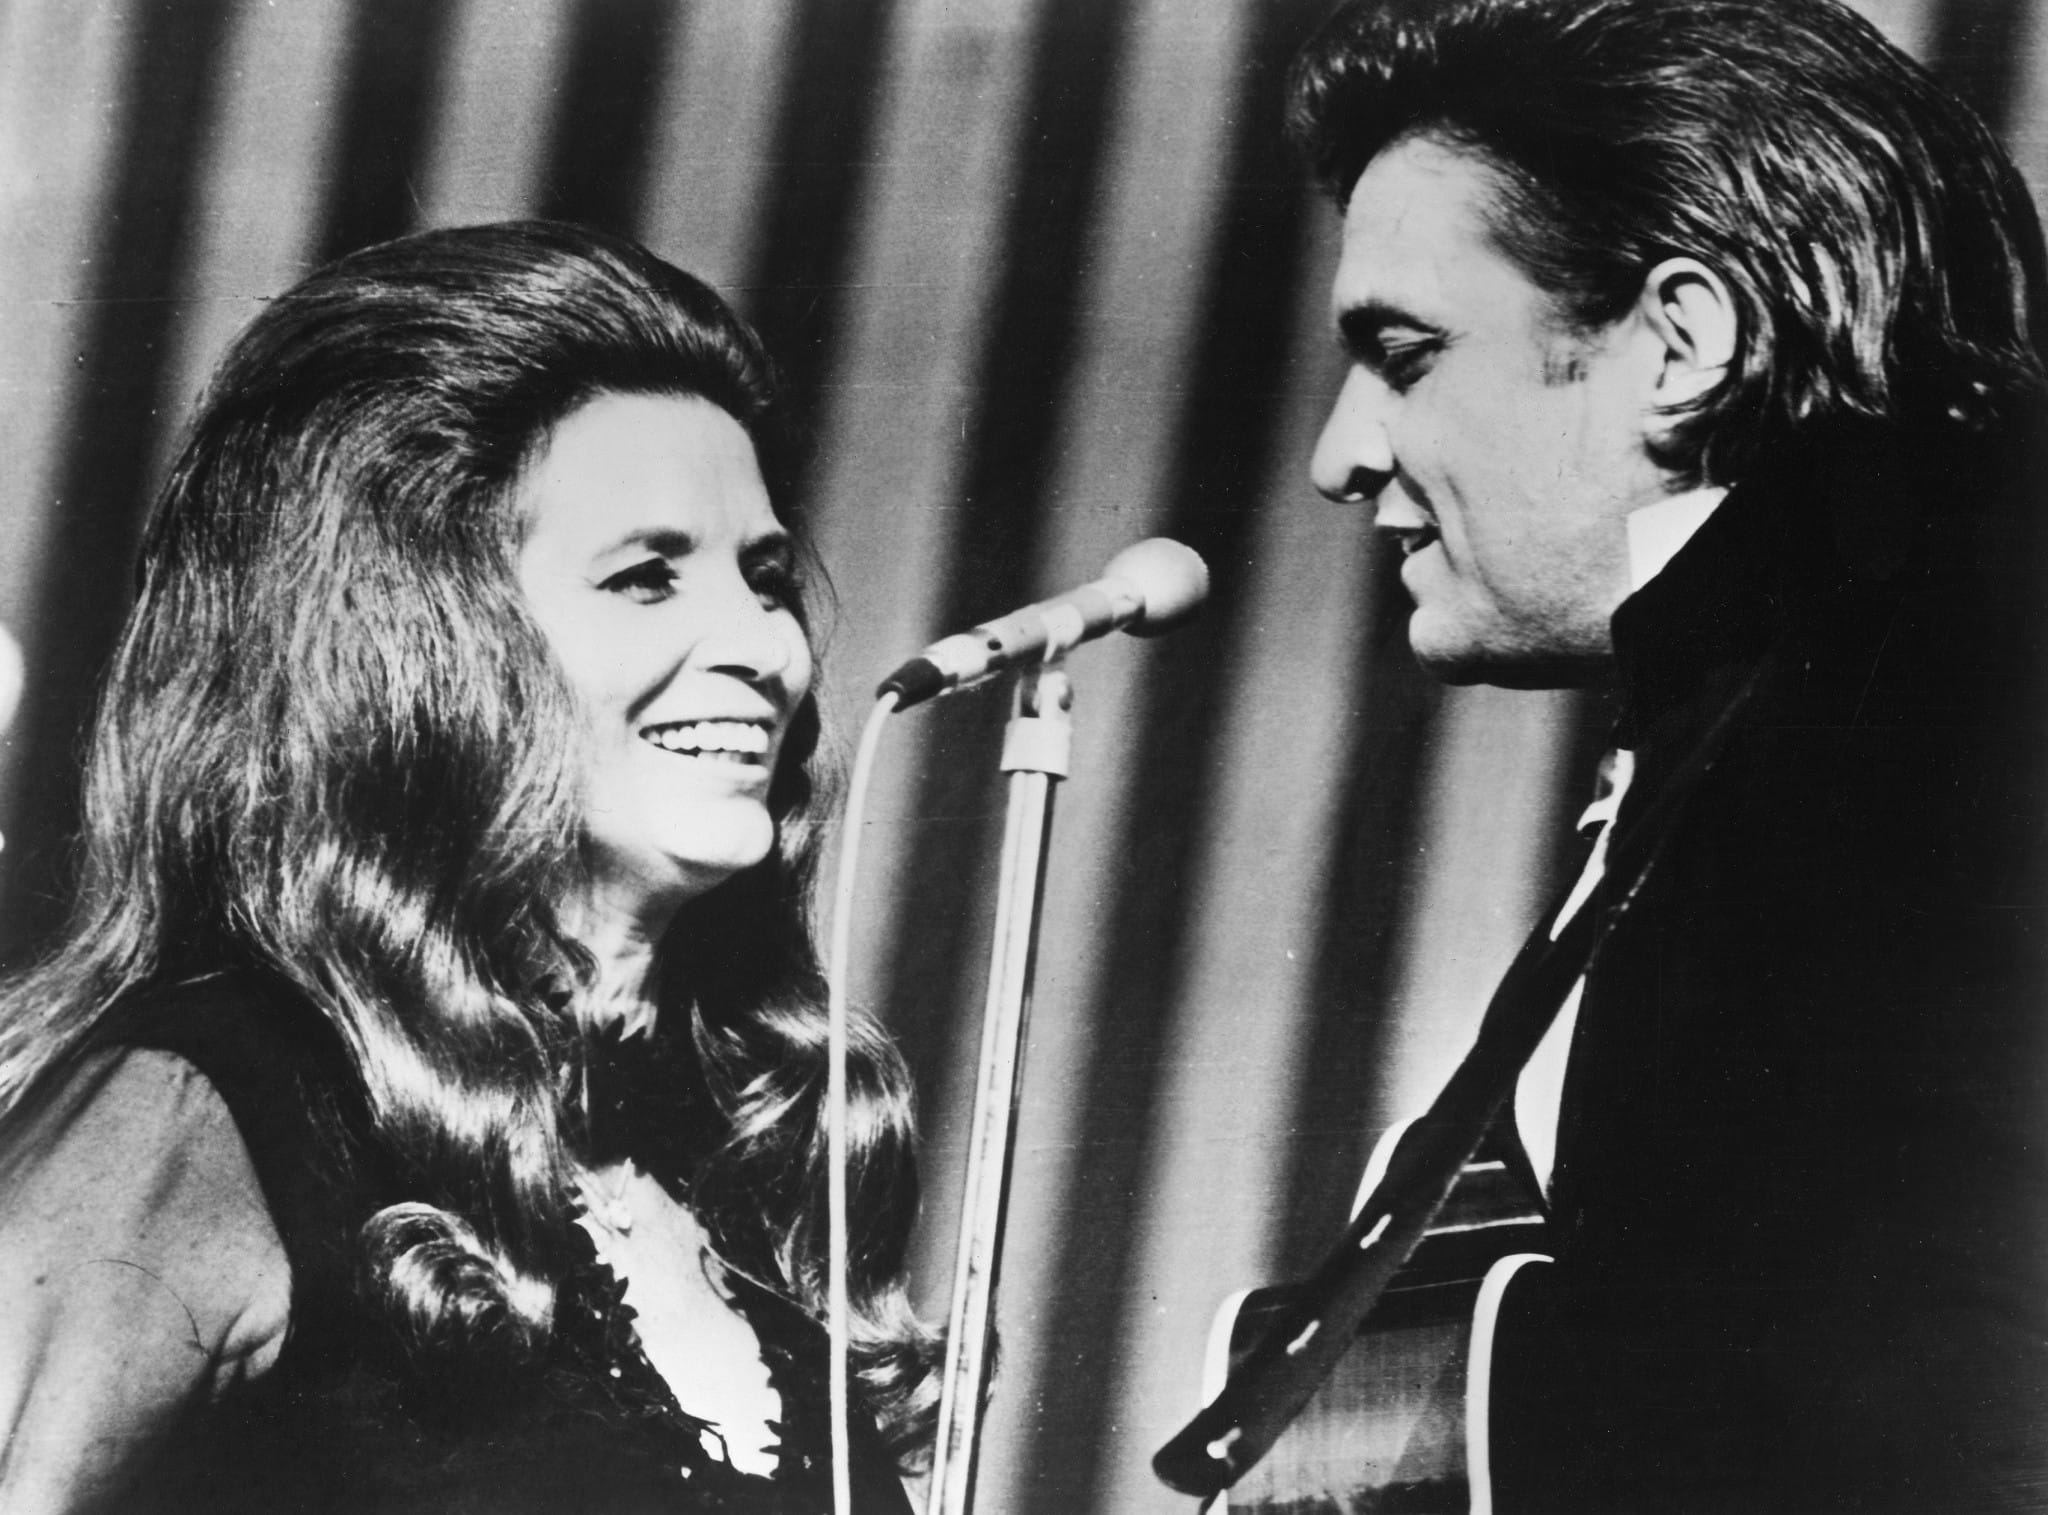 Johnny Cash and June Carter were a country music power couple